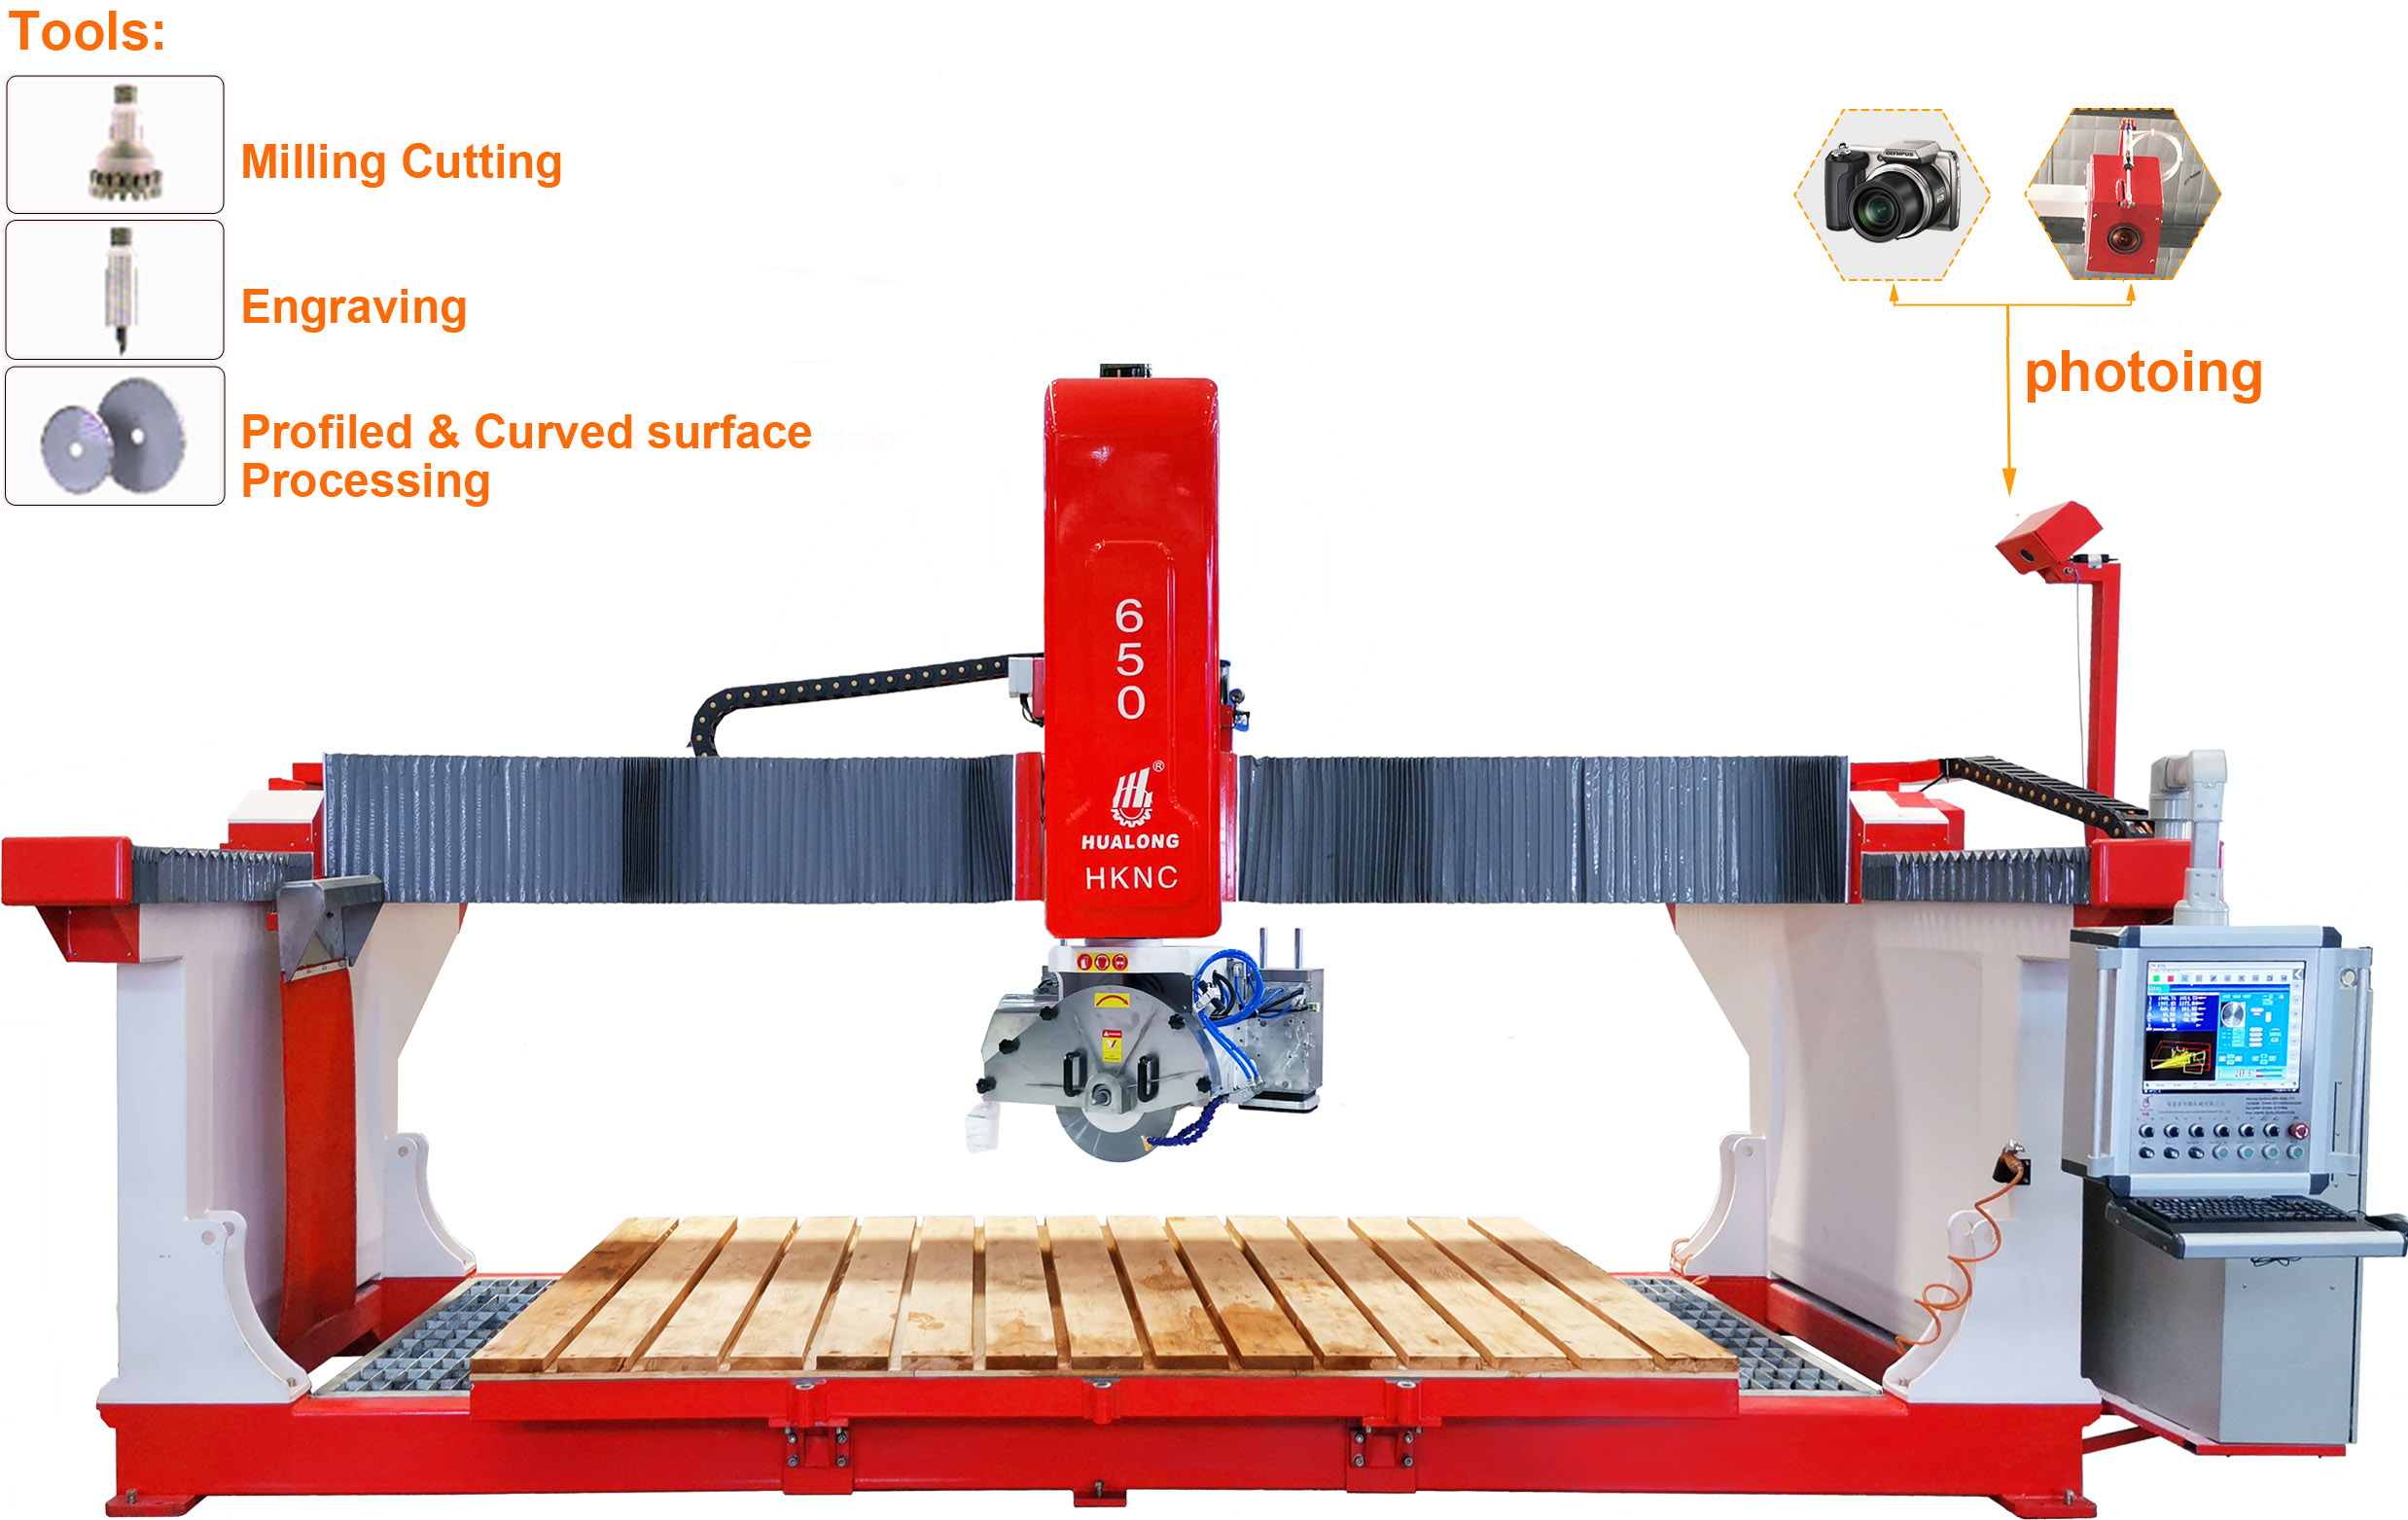 5 Axis CNC Router Stone Marble Granite Cutting Bridge Machine for Sink Cutting Slab Milling Engraving